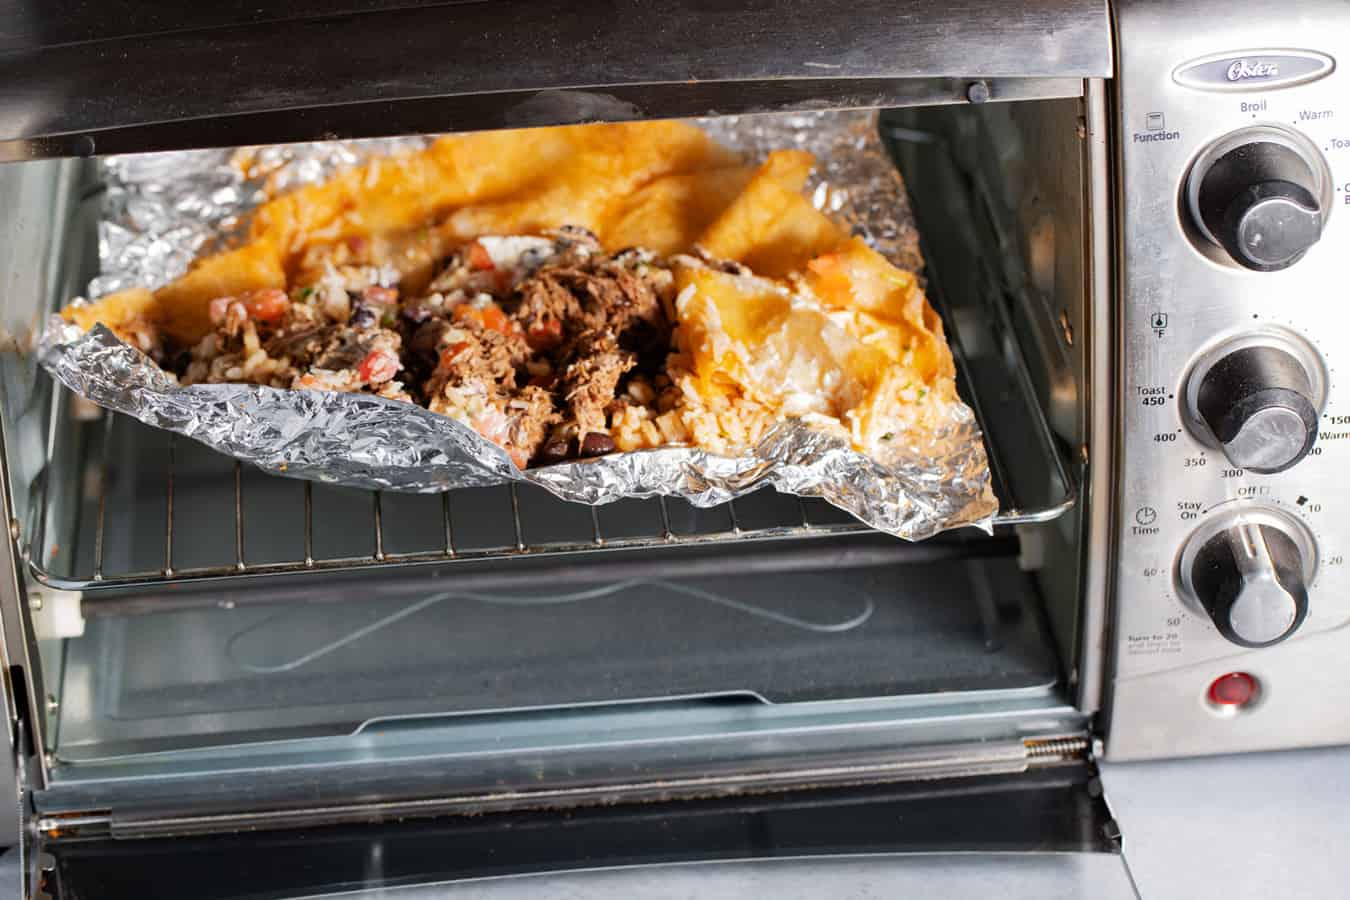 unrolled burrito in toaster oven to reheat